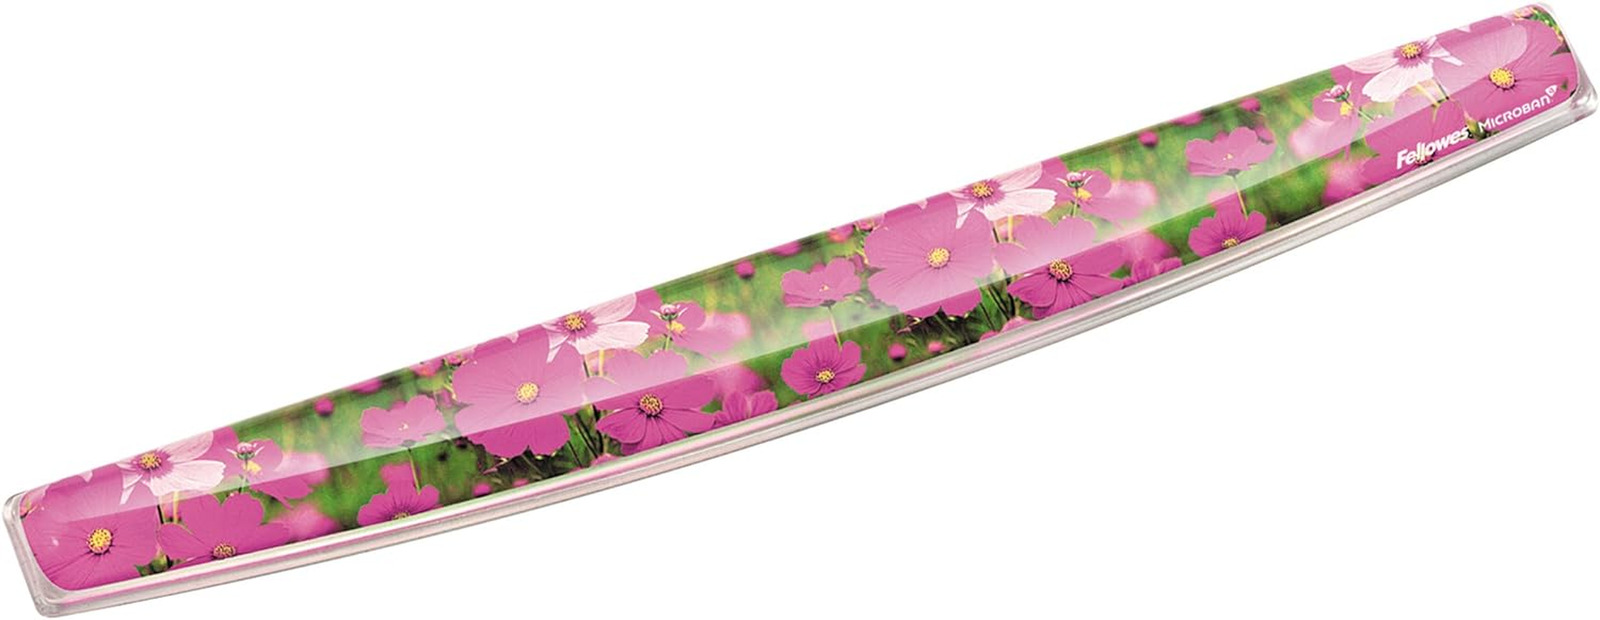 Fellowes Photo Gel Keyboard Wrist Rest with Microban Protection, Pink Flowers